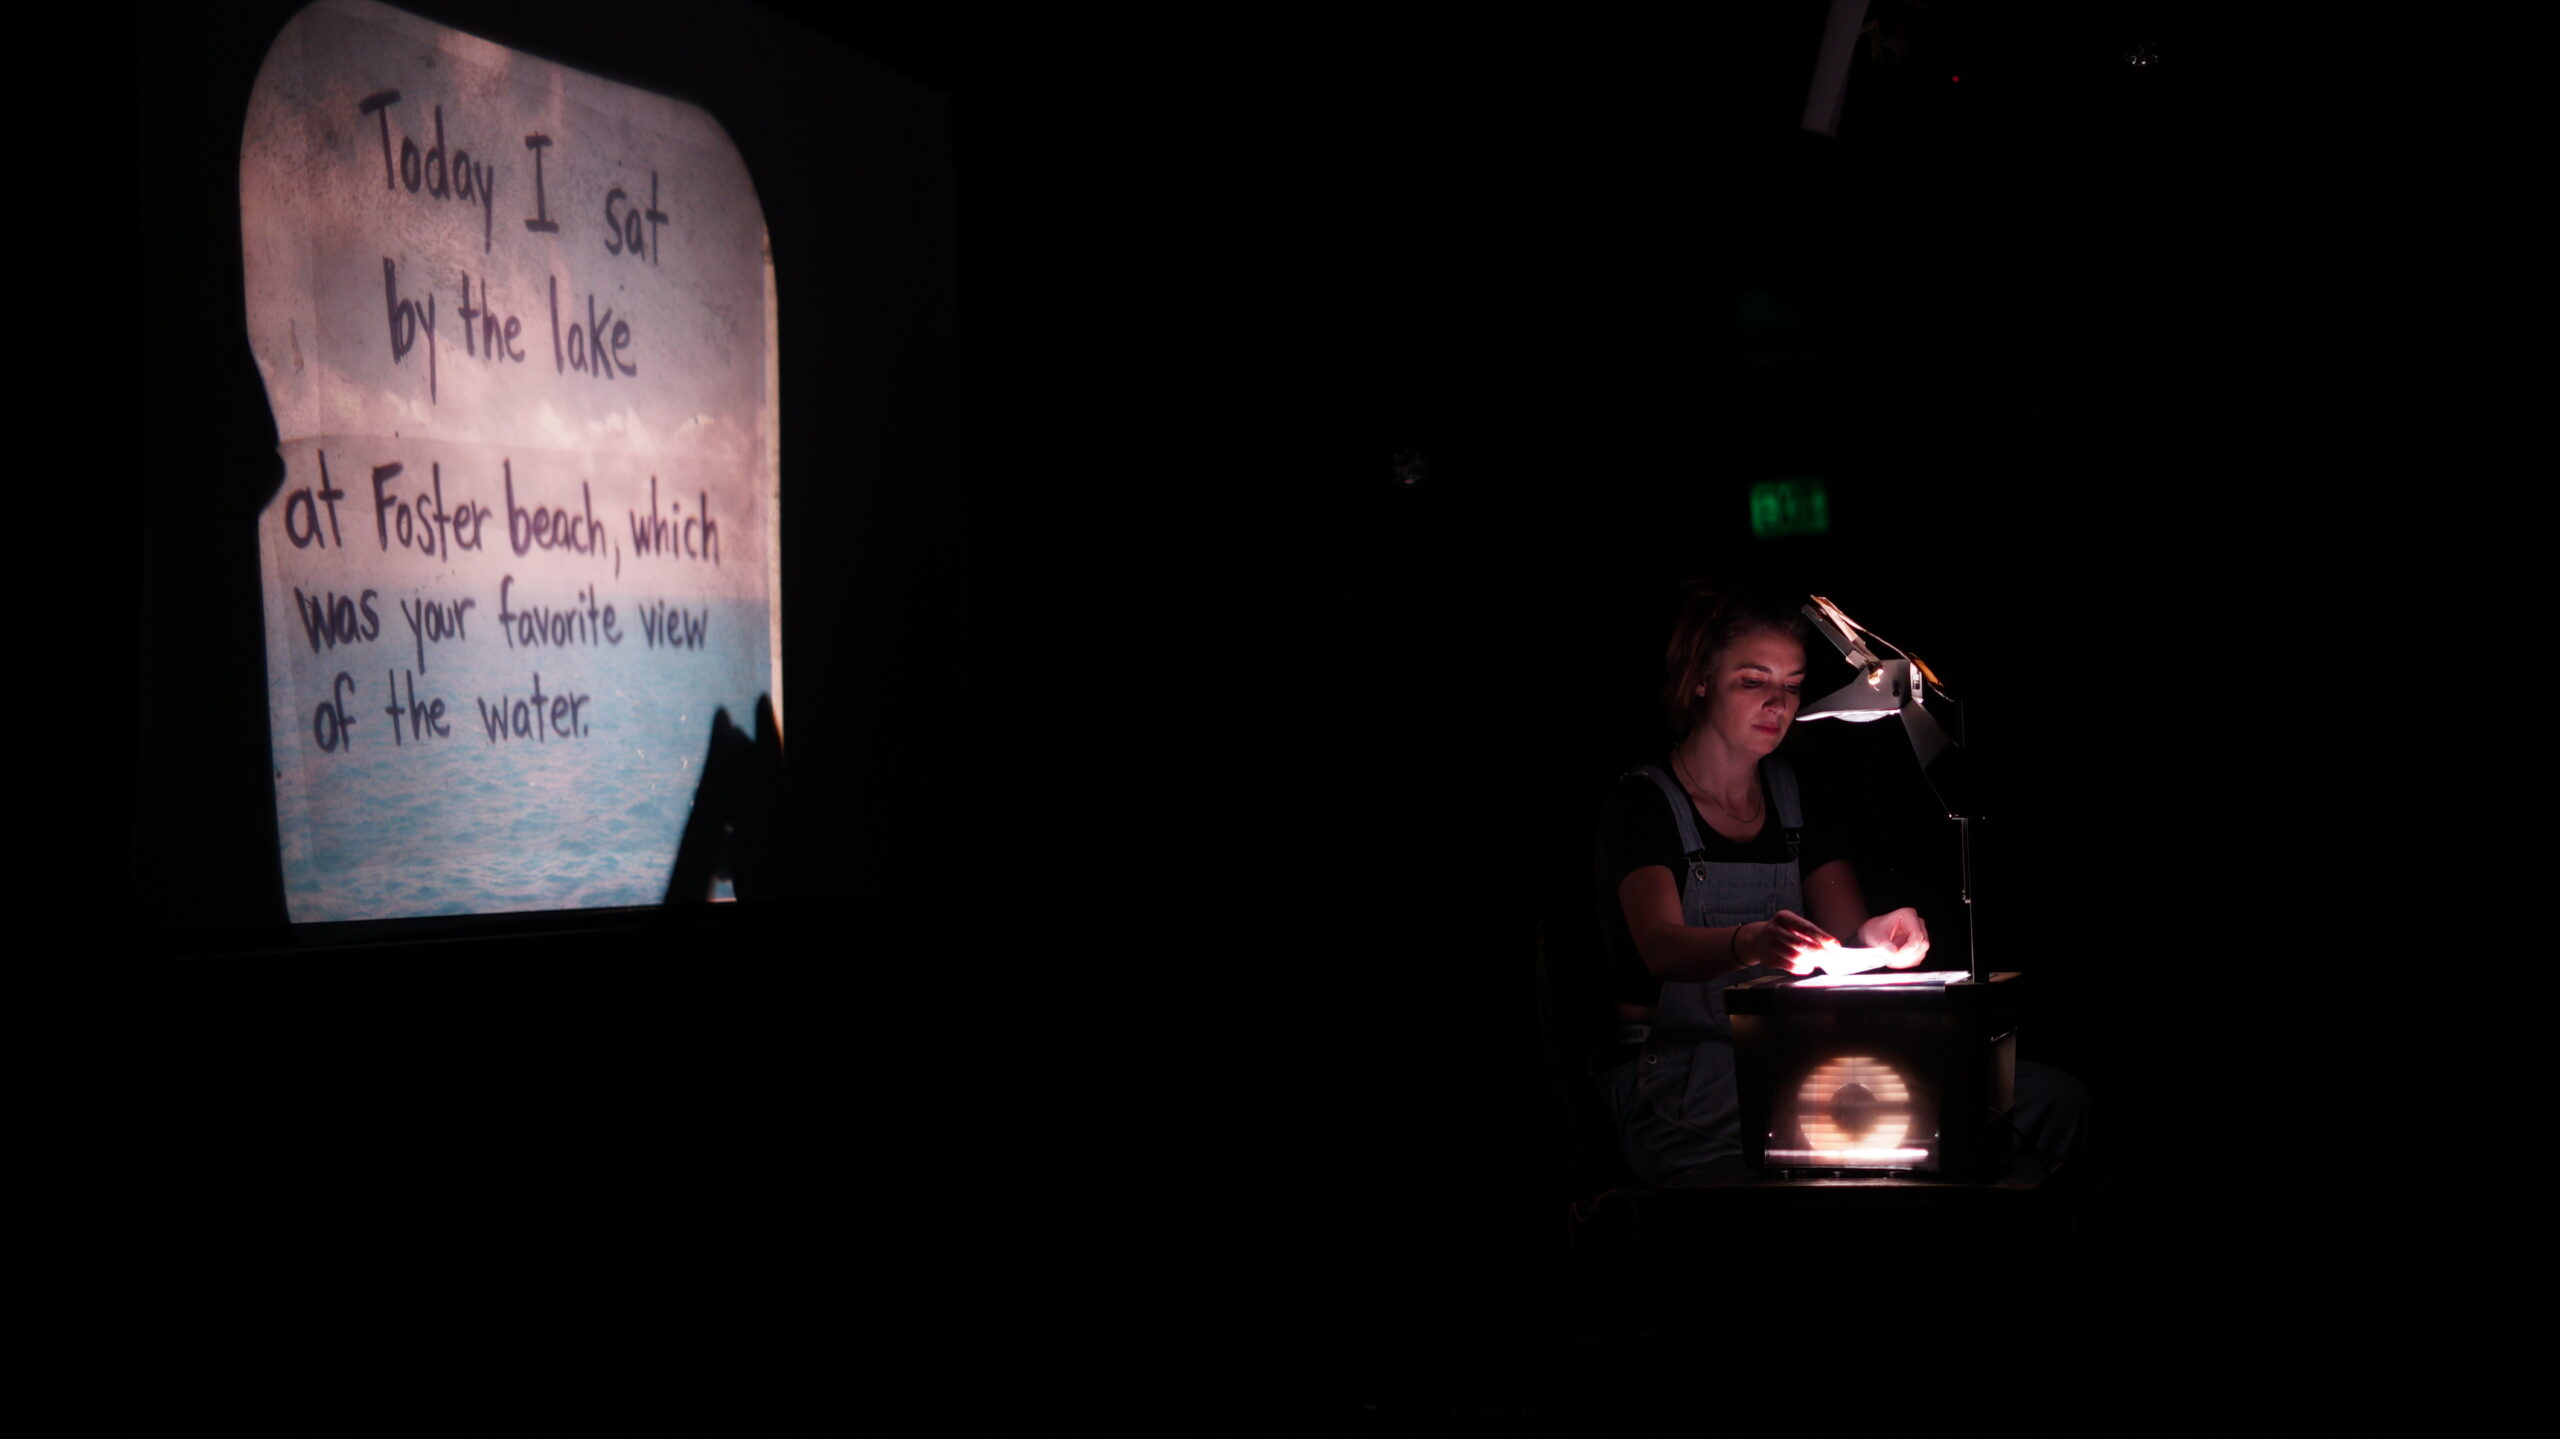 A person of light skin tone sits by an overhead projector, while a screen behind them shows an image of a beach with words that read, "Today I sat by the lake at Foster beach, which was your favorite view of the water."